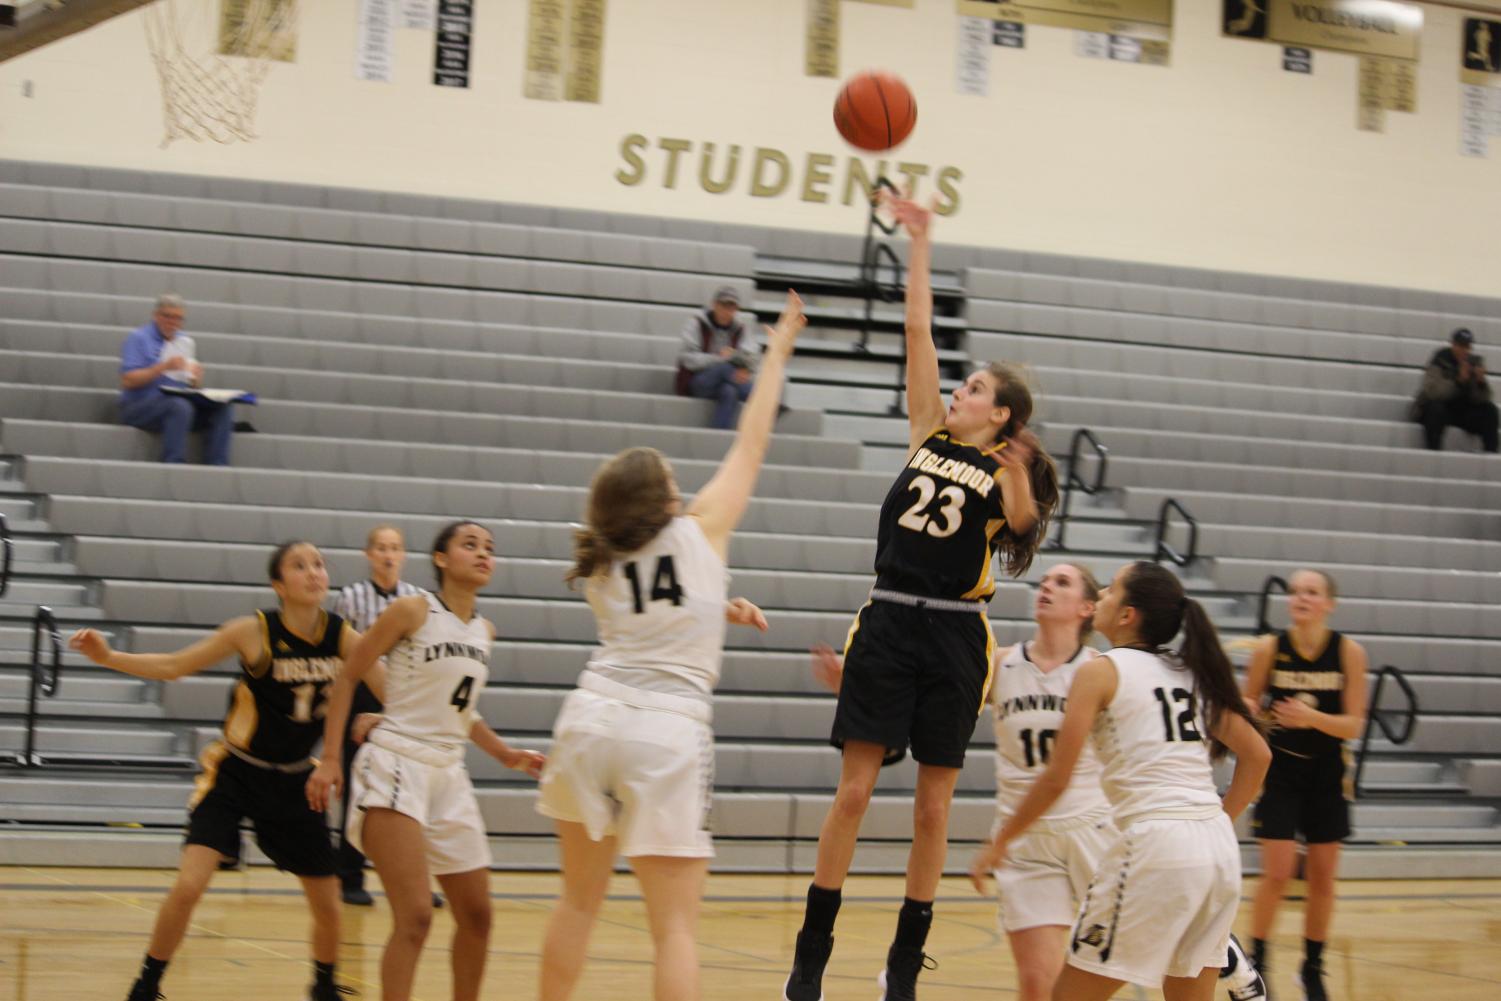 Jenna+Troy+drives+to+the+basket+and+floats+the+ball+over+an+outstretched+defender.++Inglemoor+went+on+to+beat+Lynwood+63-58+in+their+season+opener.+